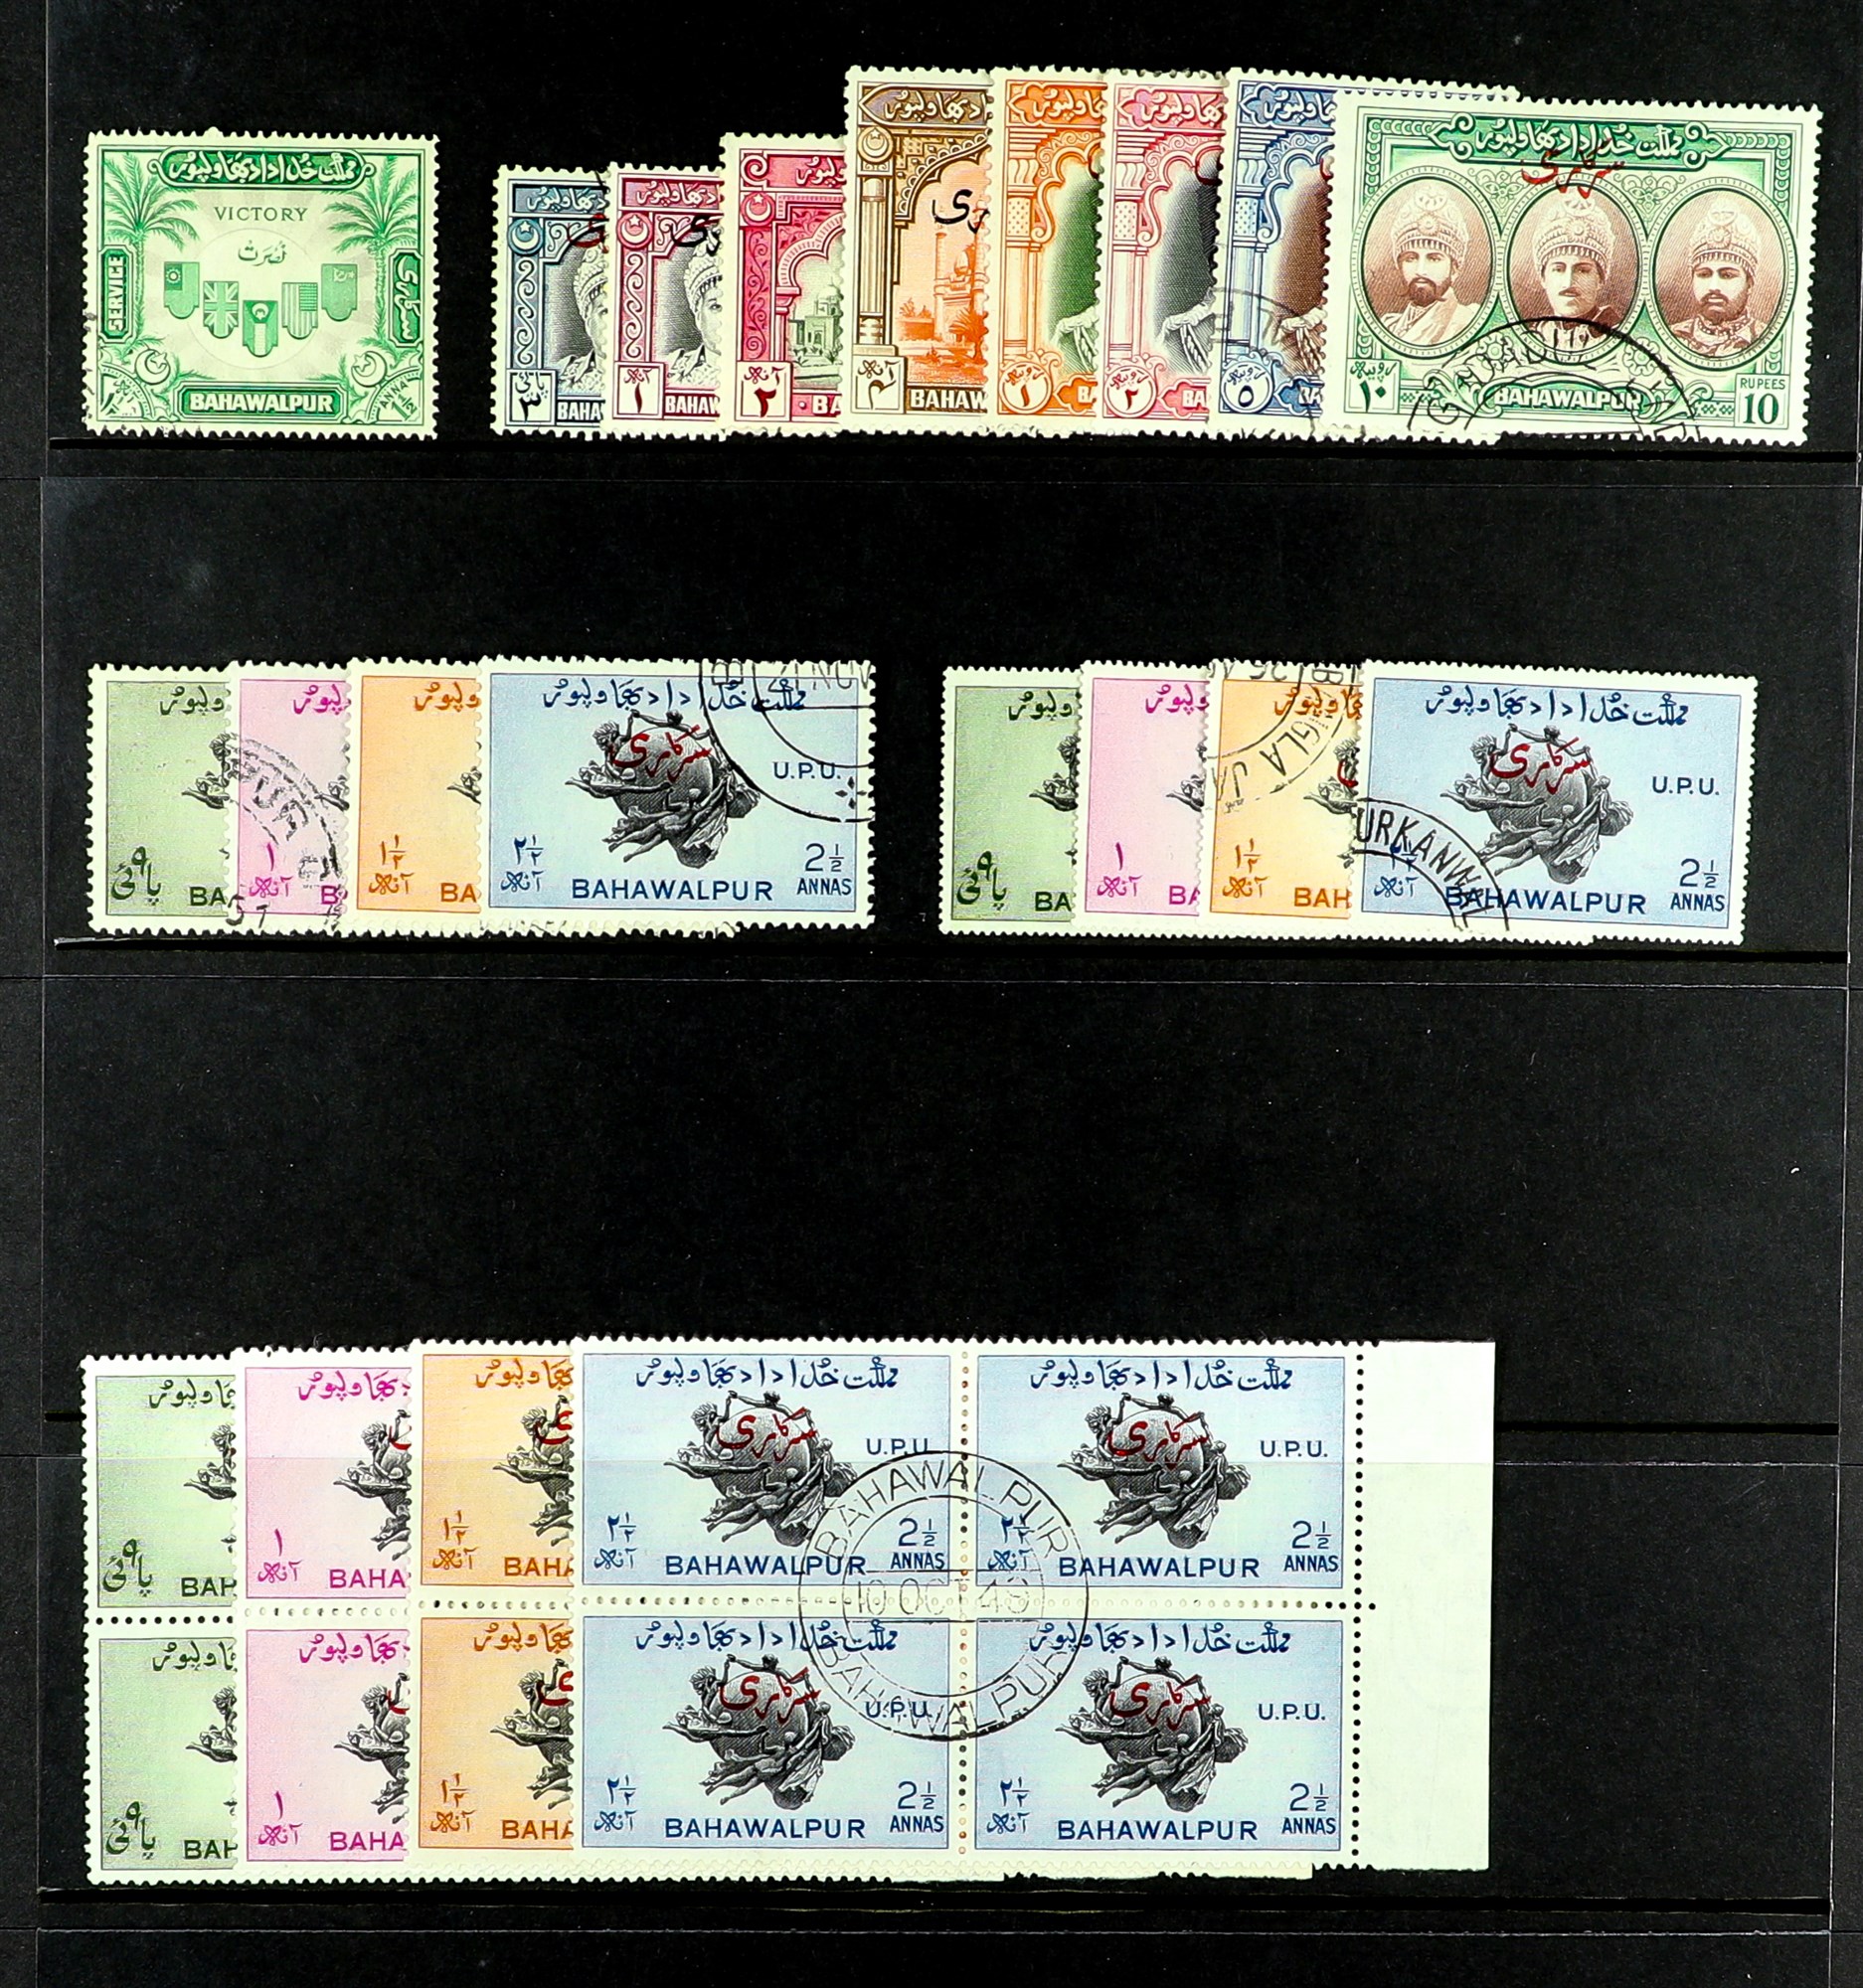 PAKISTAN - BAHAWALPUR 1947 - 1949 USED COLLECTION on protective pages with the Postage issues - Image 2 of 2